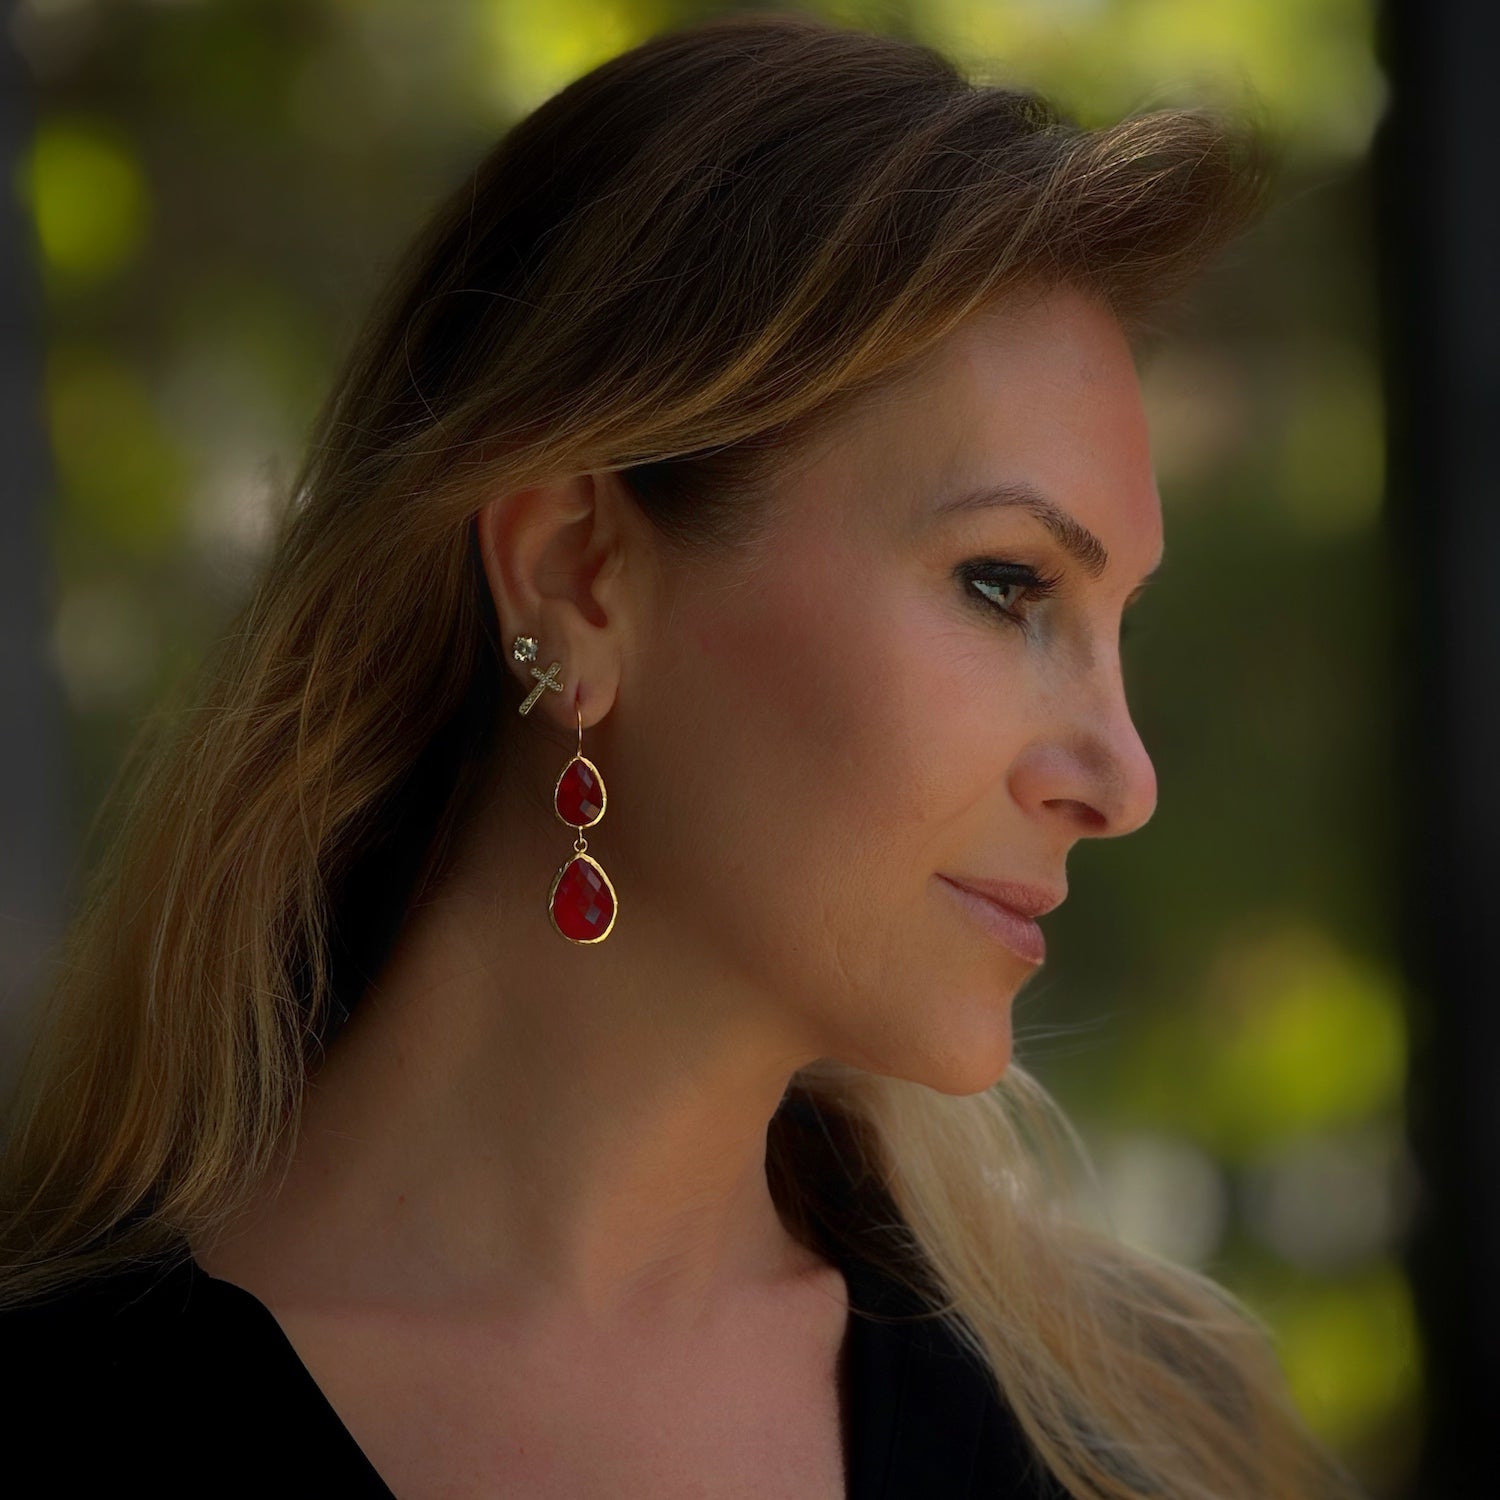 Dazzle in Gold: Handcrafted Sterling Silver Earrings with Red Crystal Accents